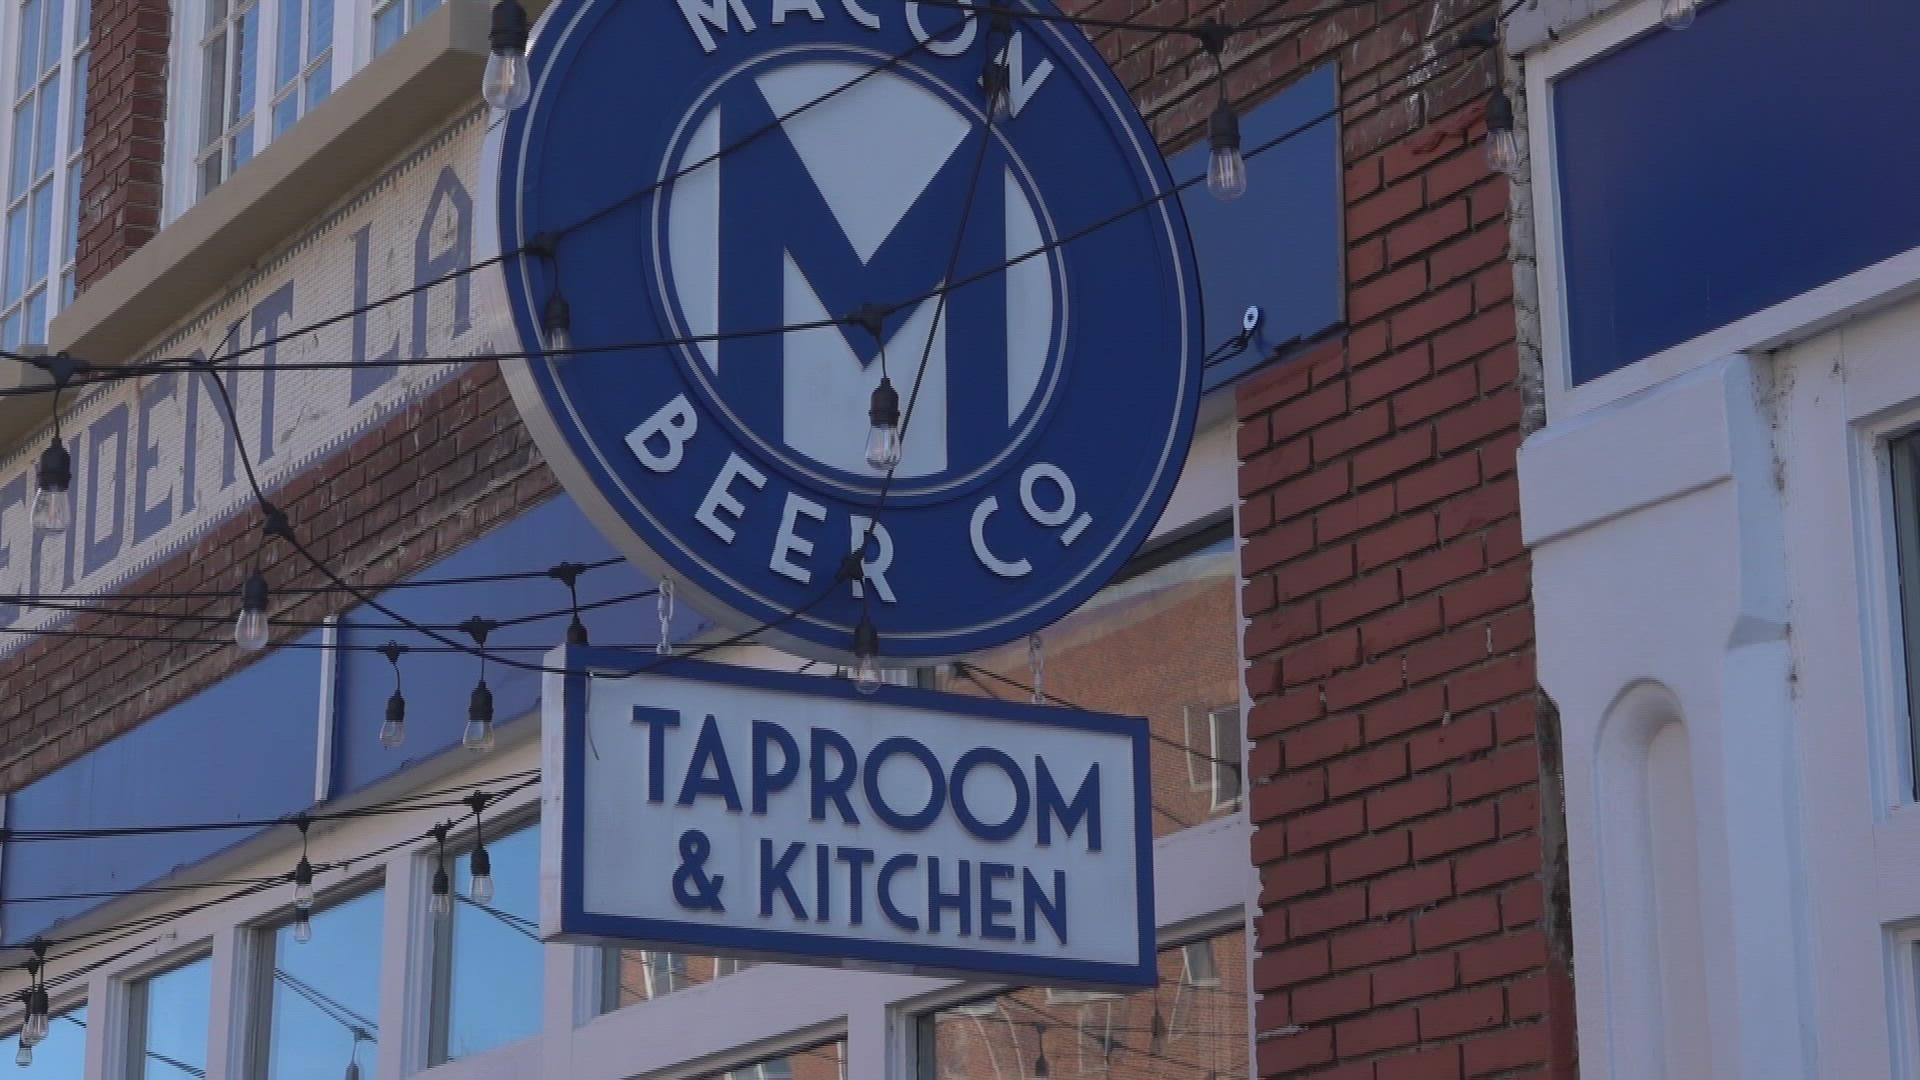 An extensive interview with the owner of Macon beer Company, just ahead of Macon Burger Week.